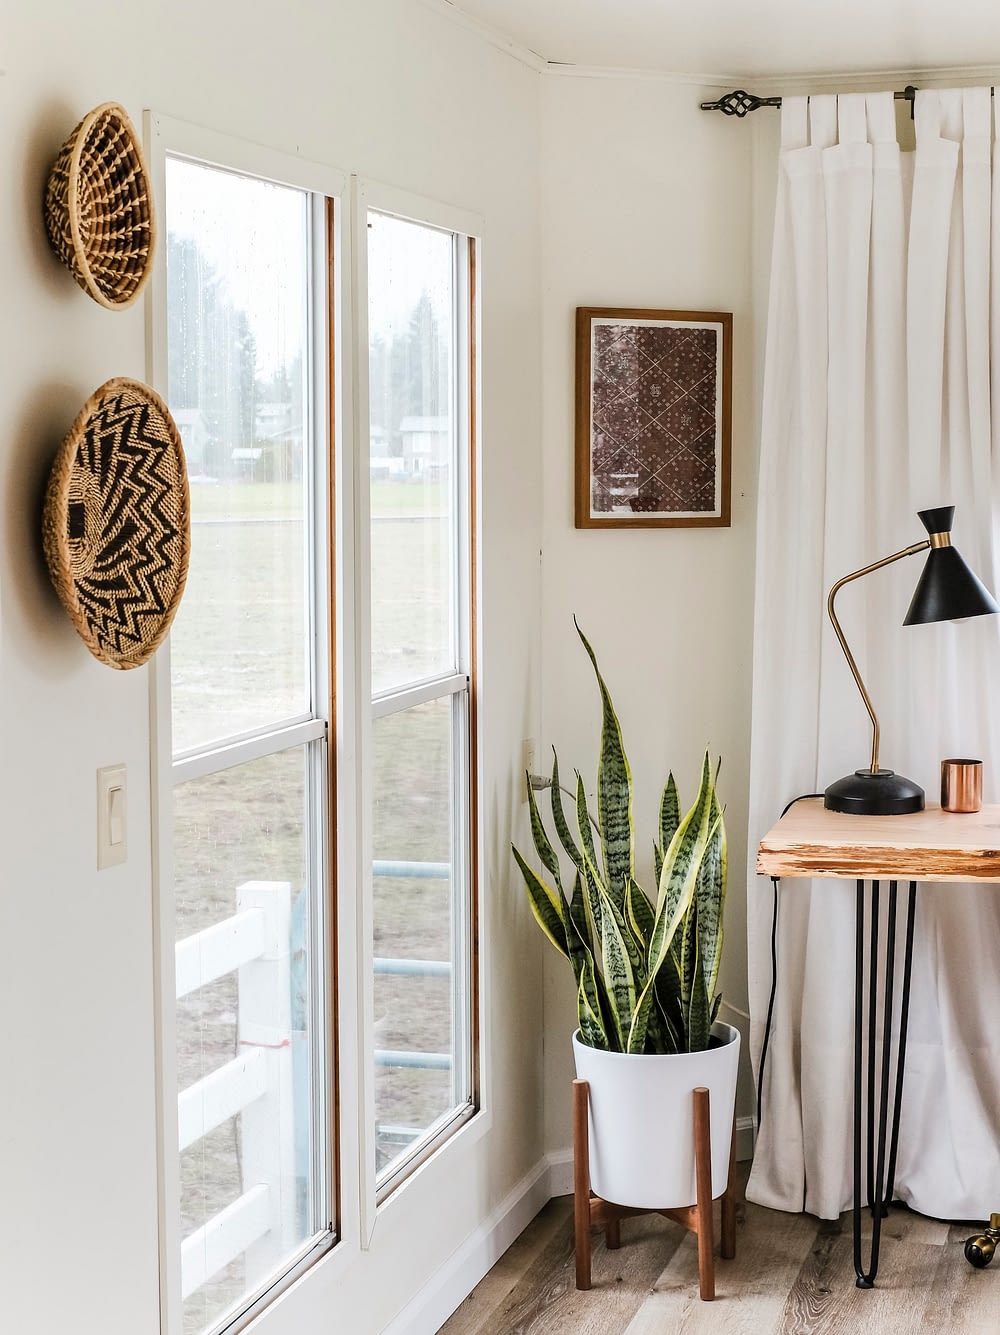 Home office inspiration with woven baskets on the wall and a snake plant in the corner